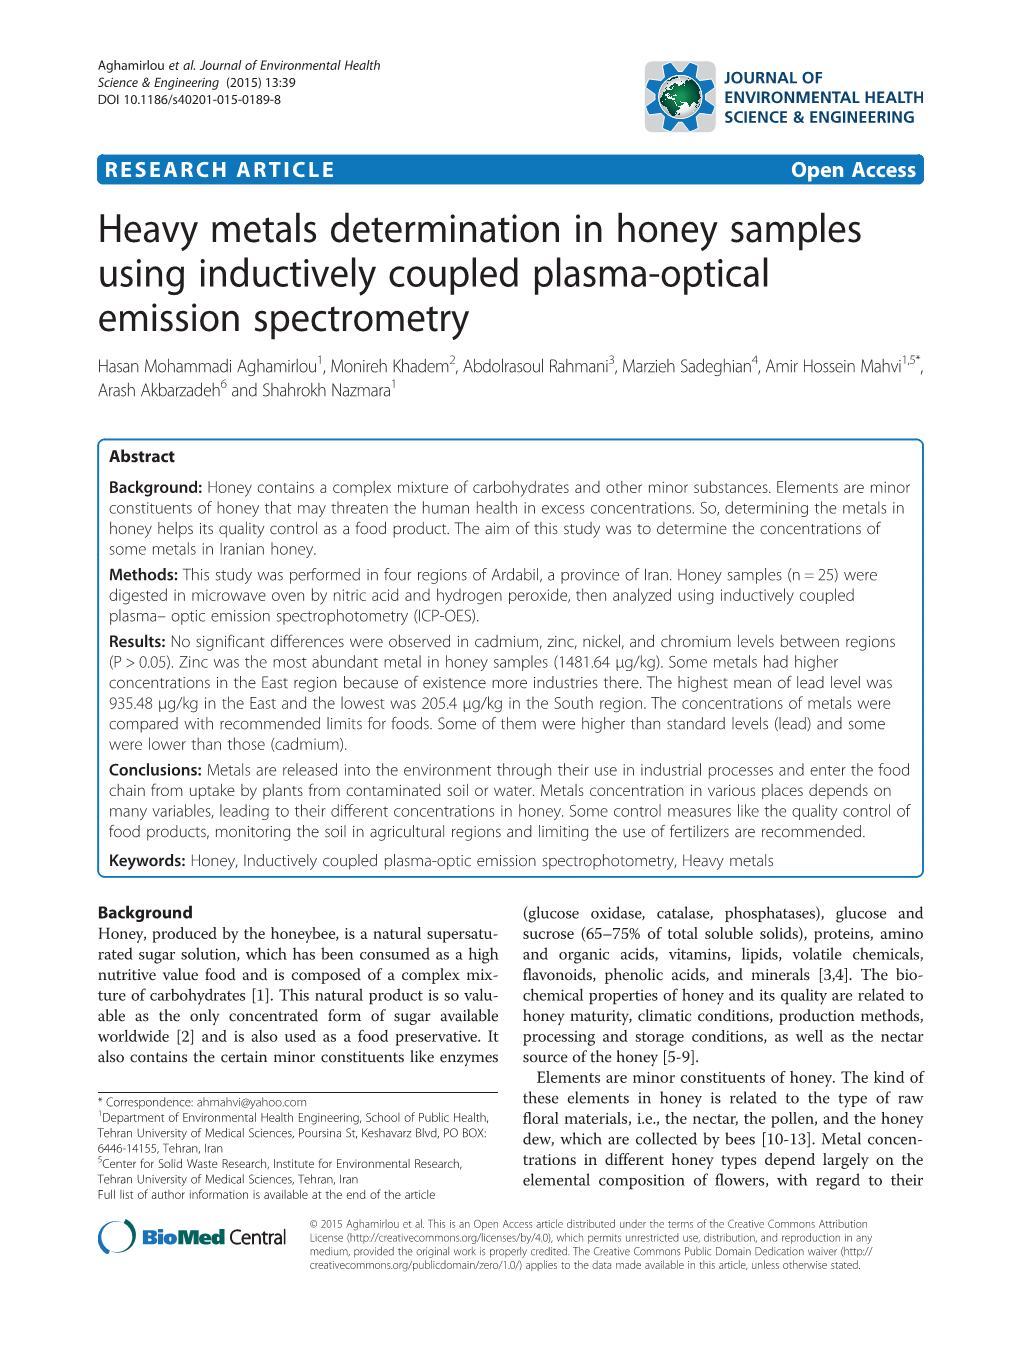 Heavy Metals Determination in Honey Samples Using Inductively Coupled